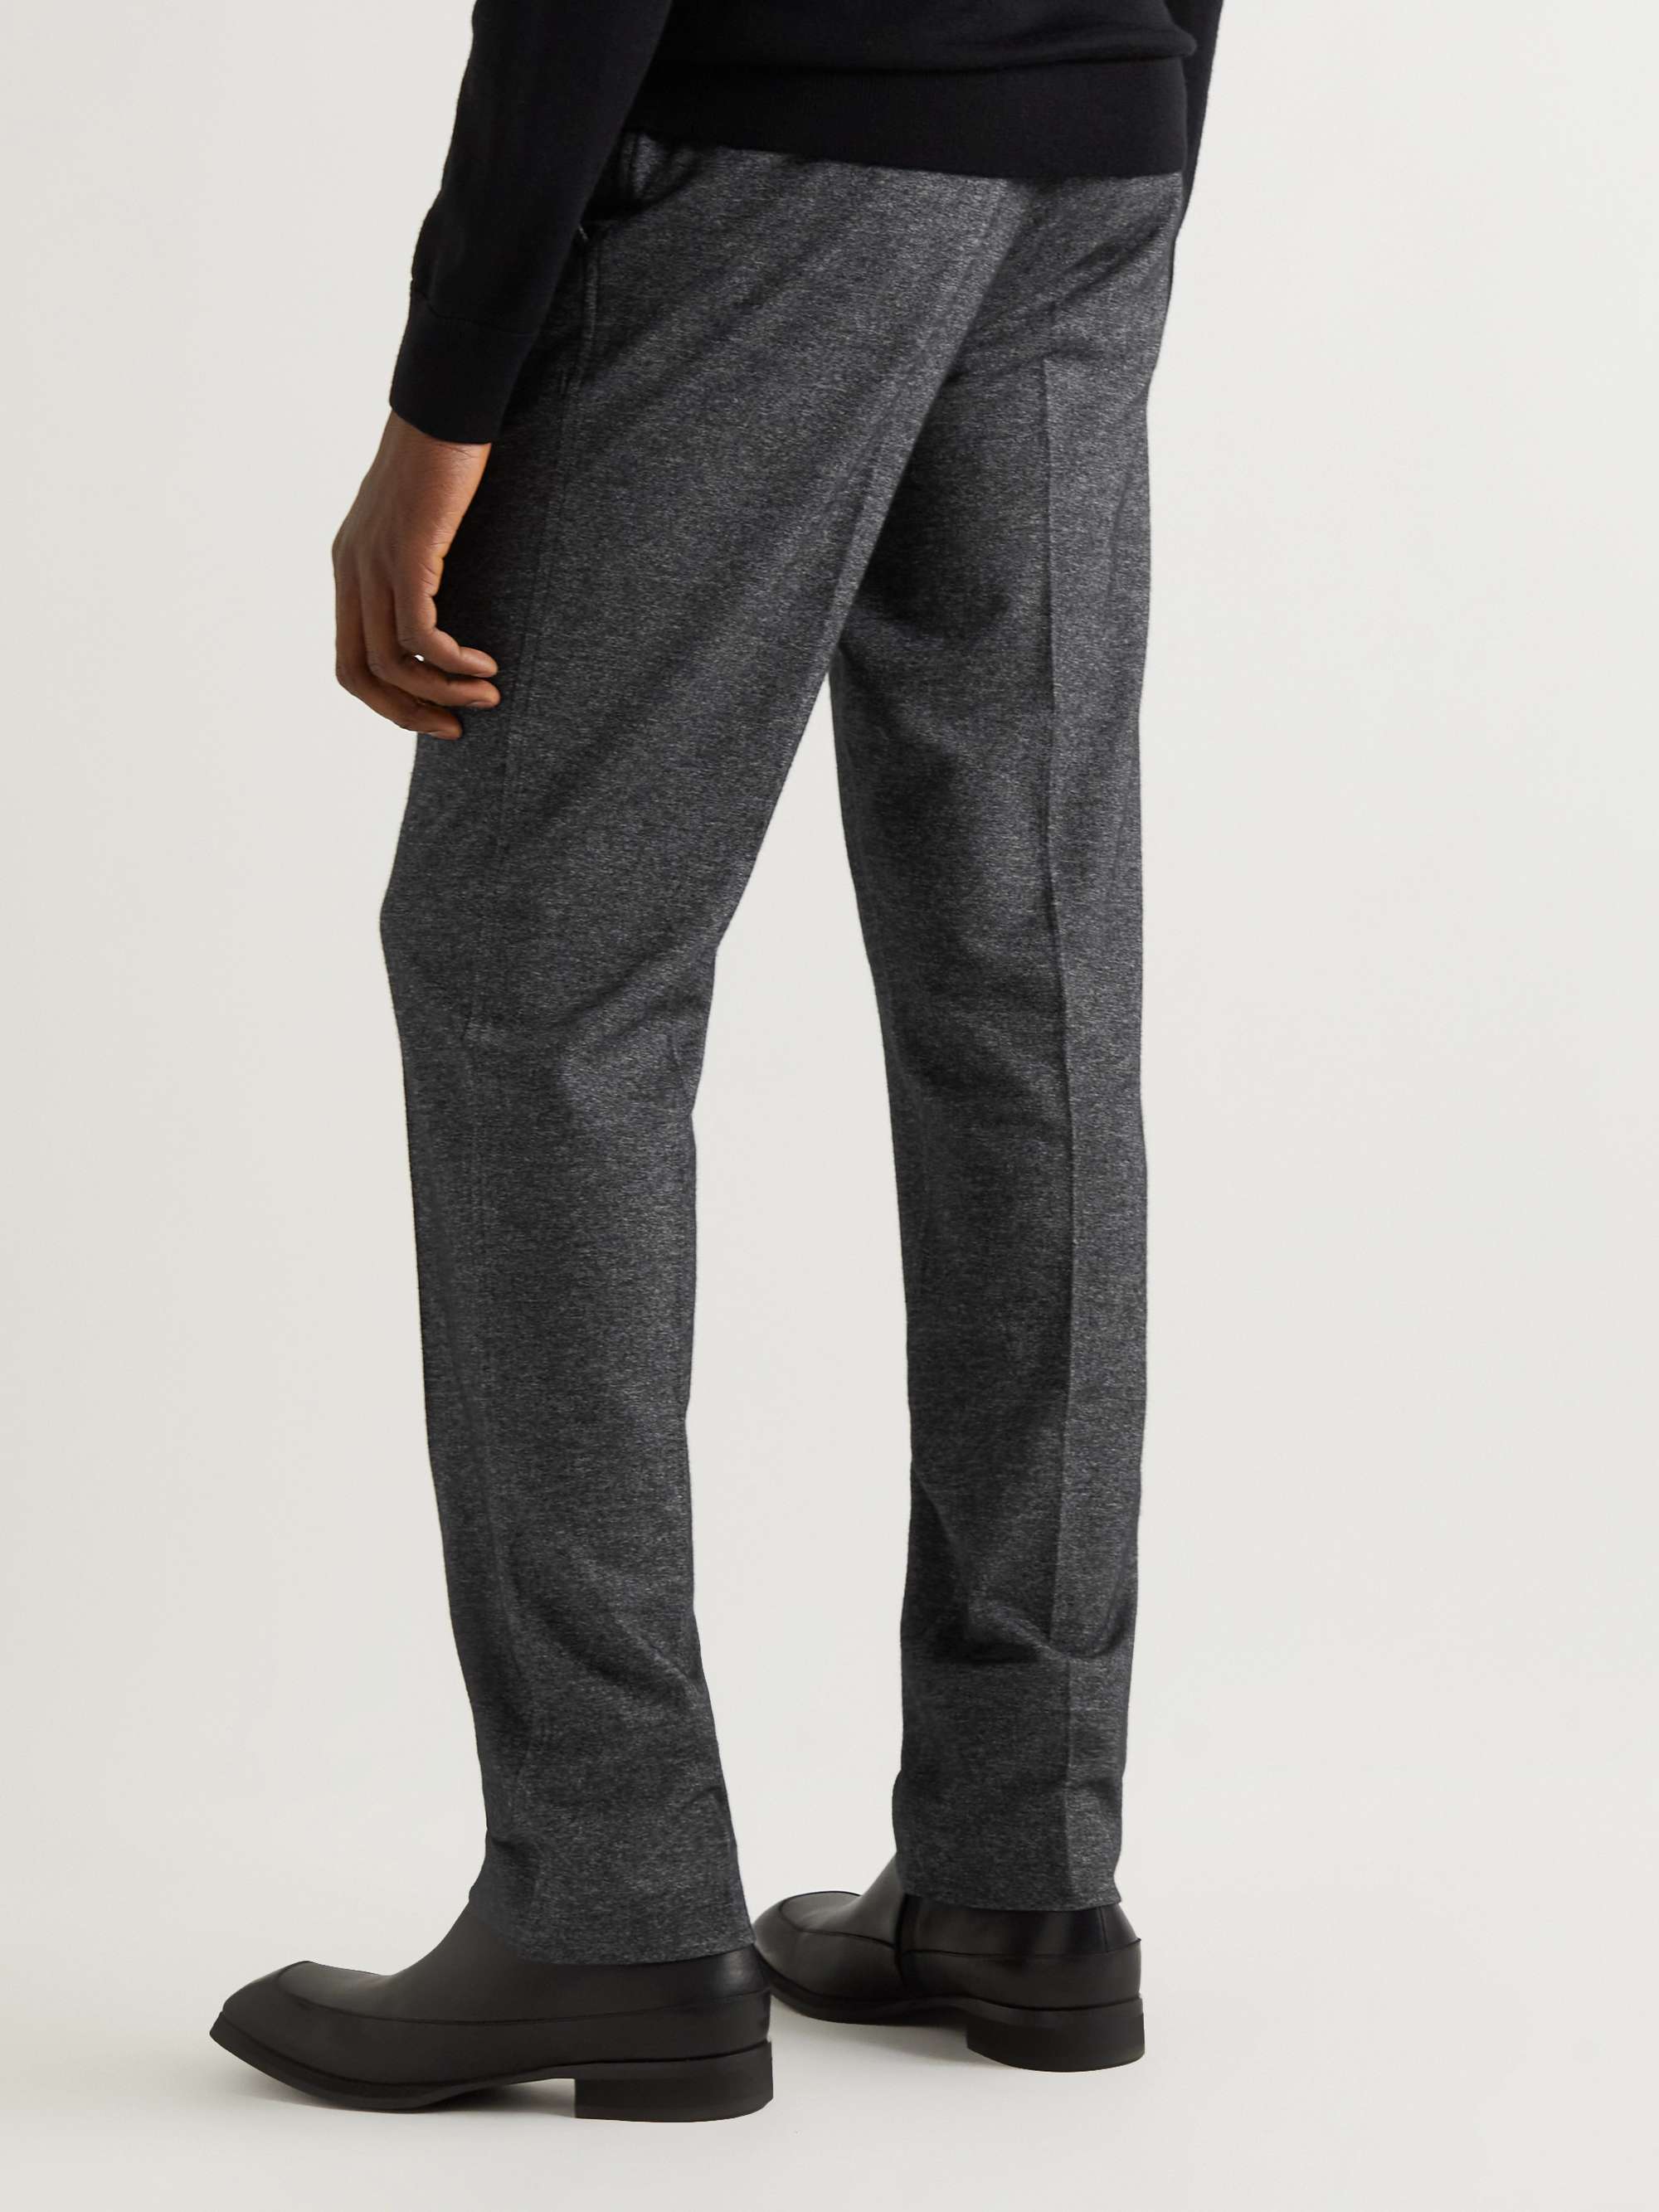 BRIONI Tapered Cashmere and Cotton-Blend Suit Trousers